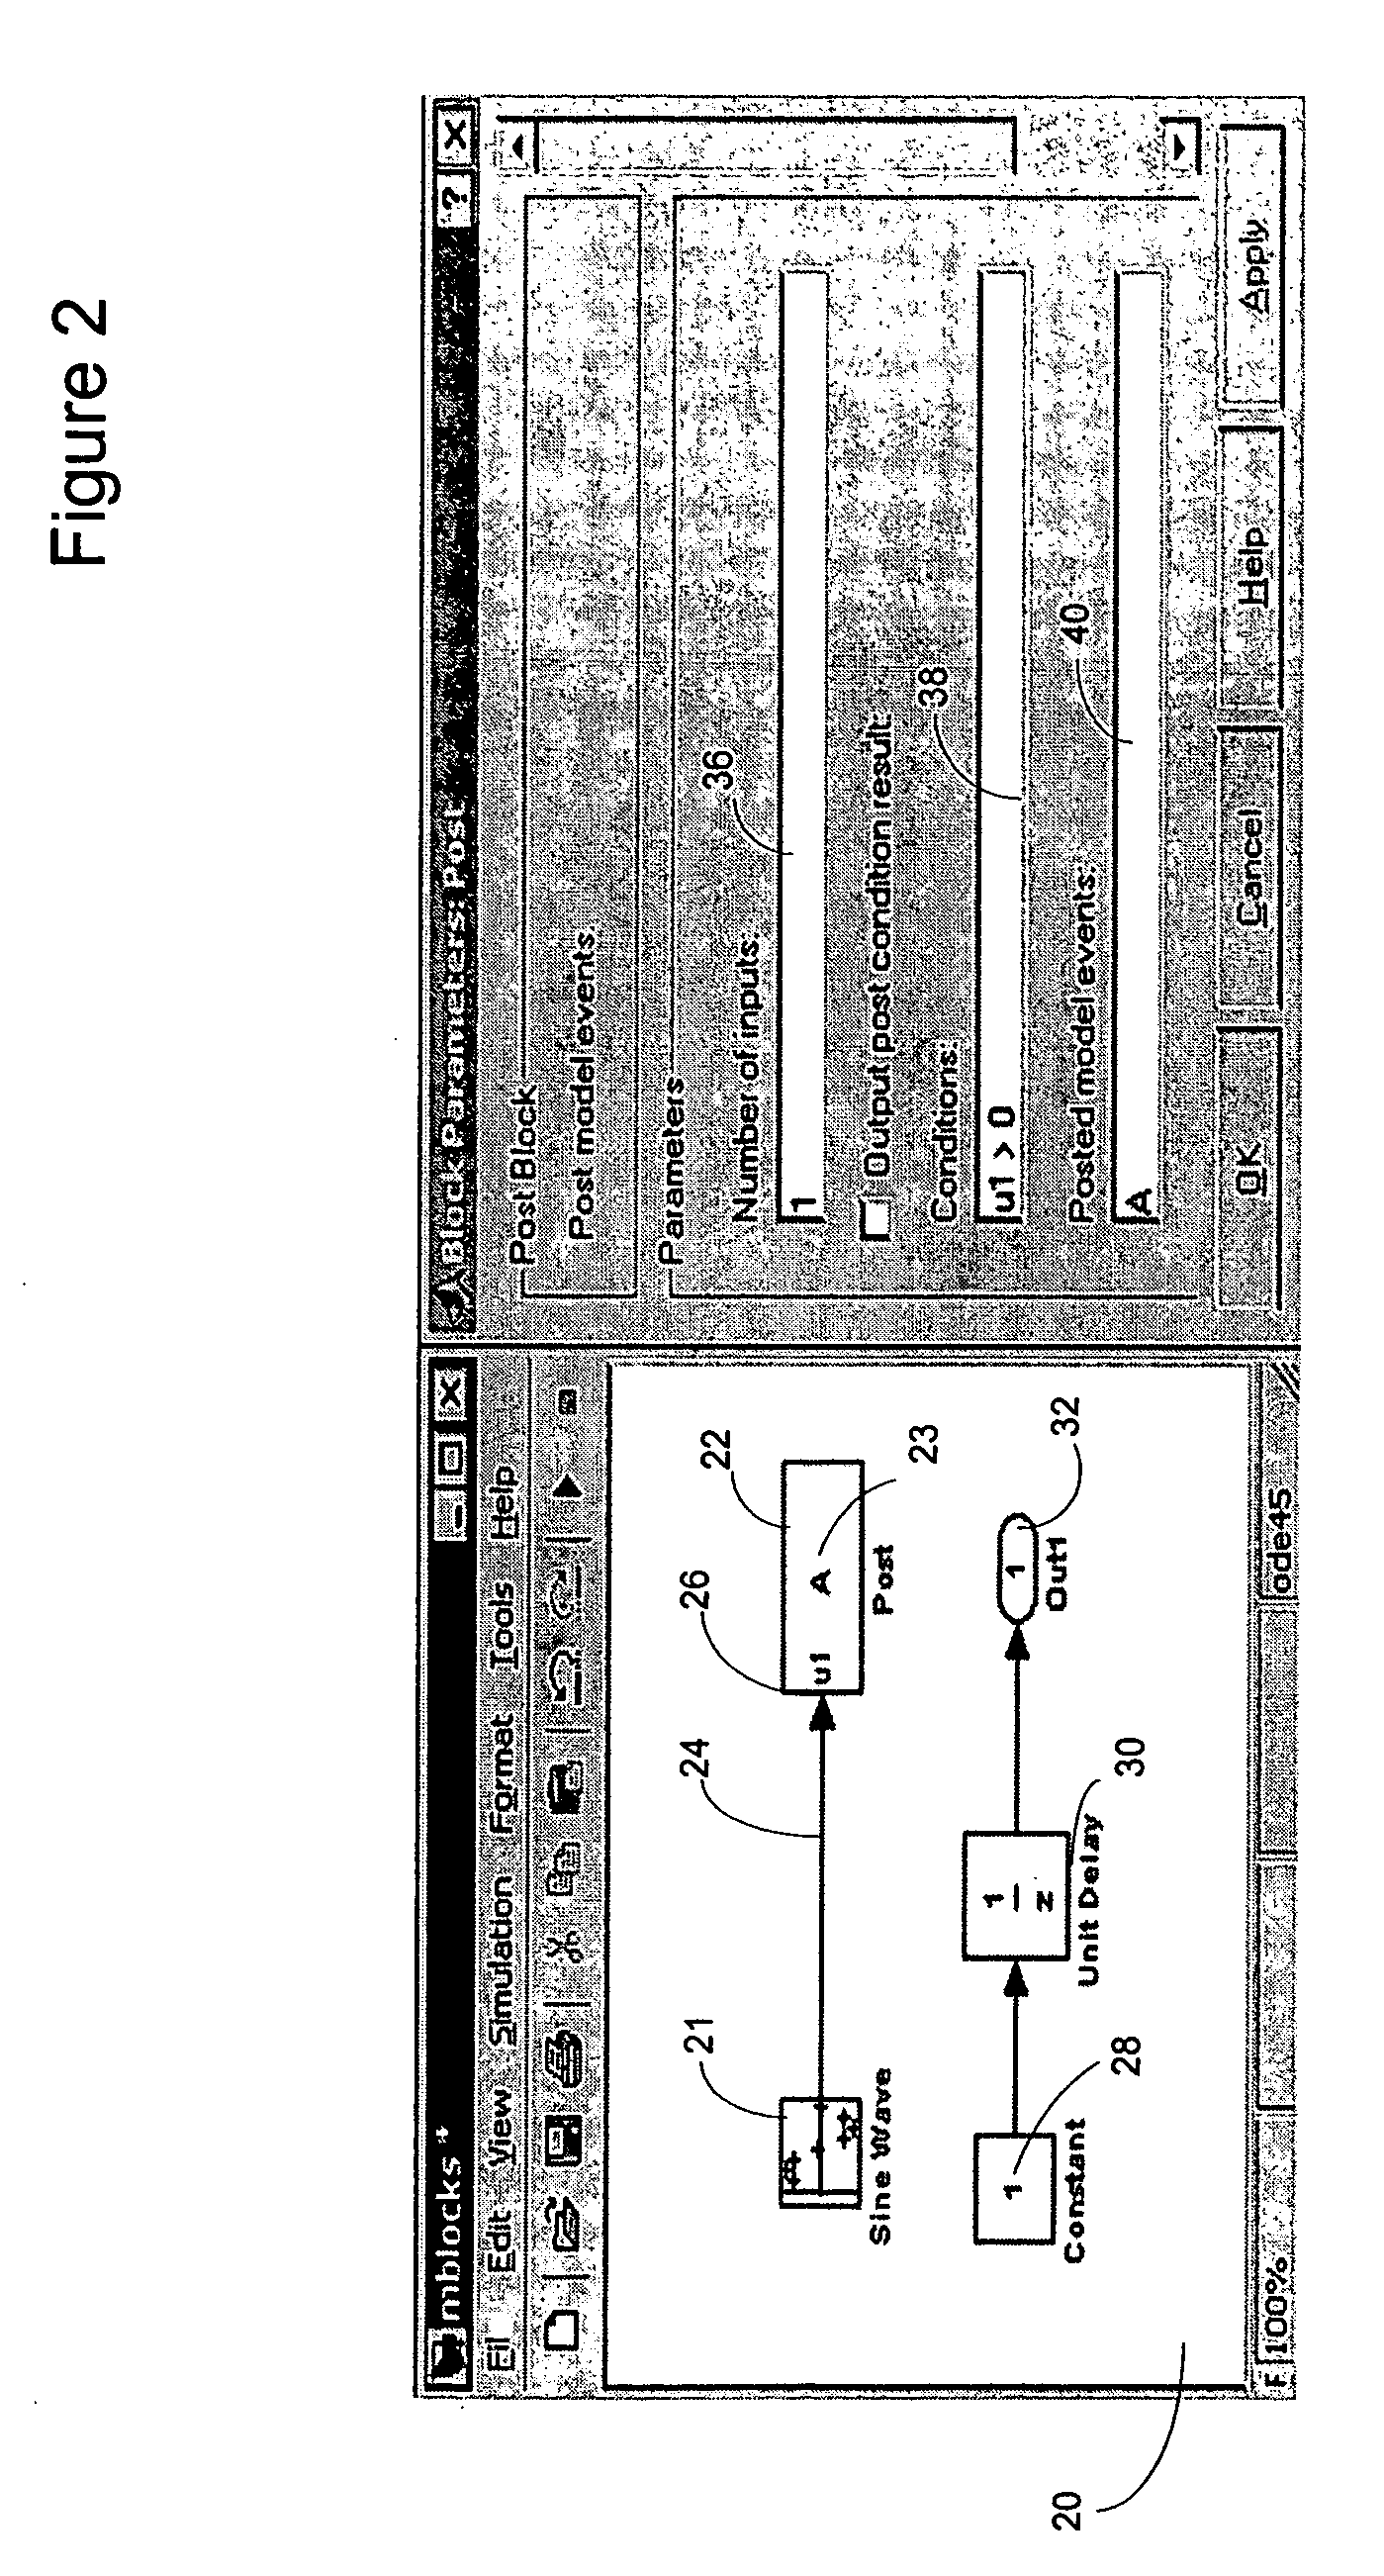 System and method for scheduling the execution of model components using model events